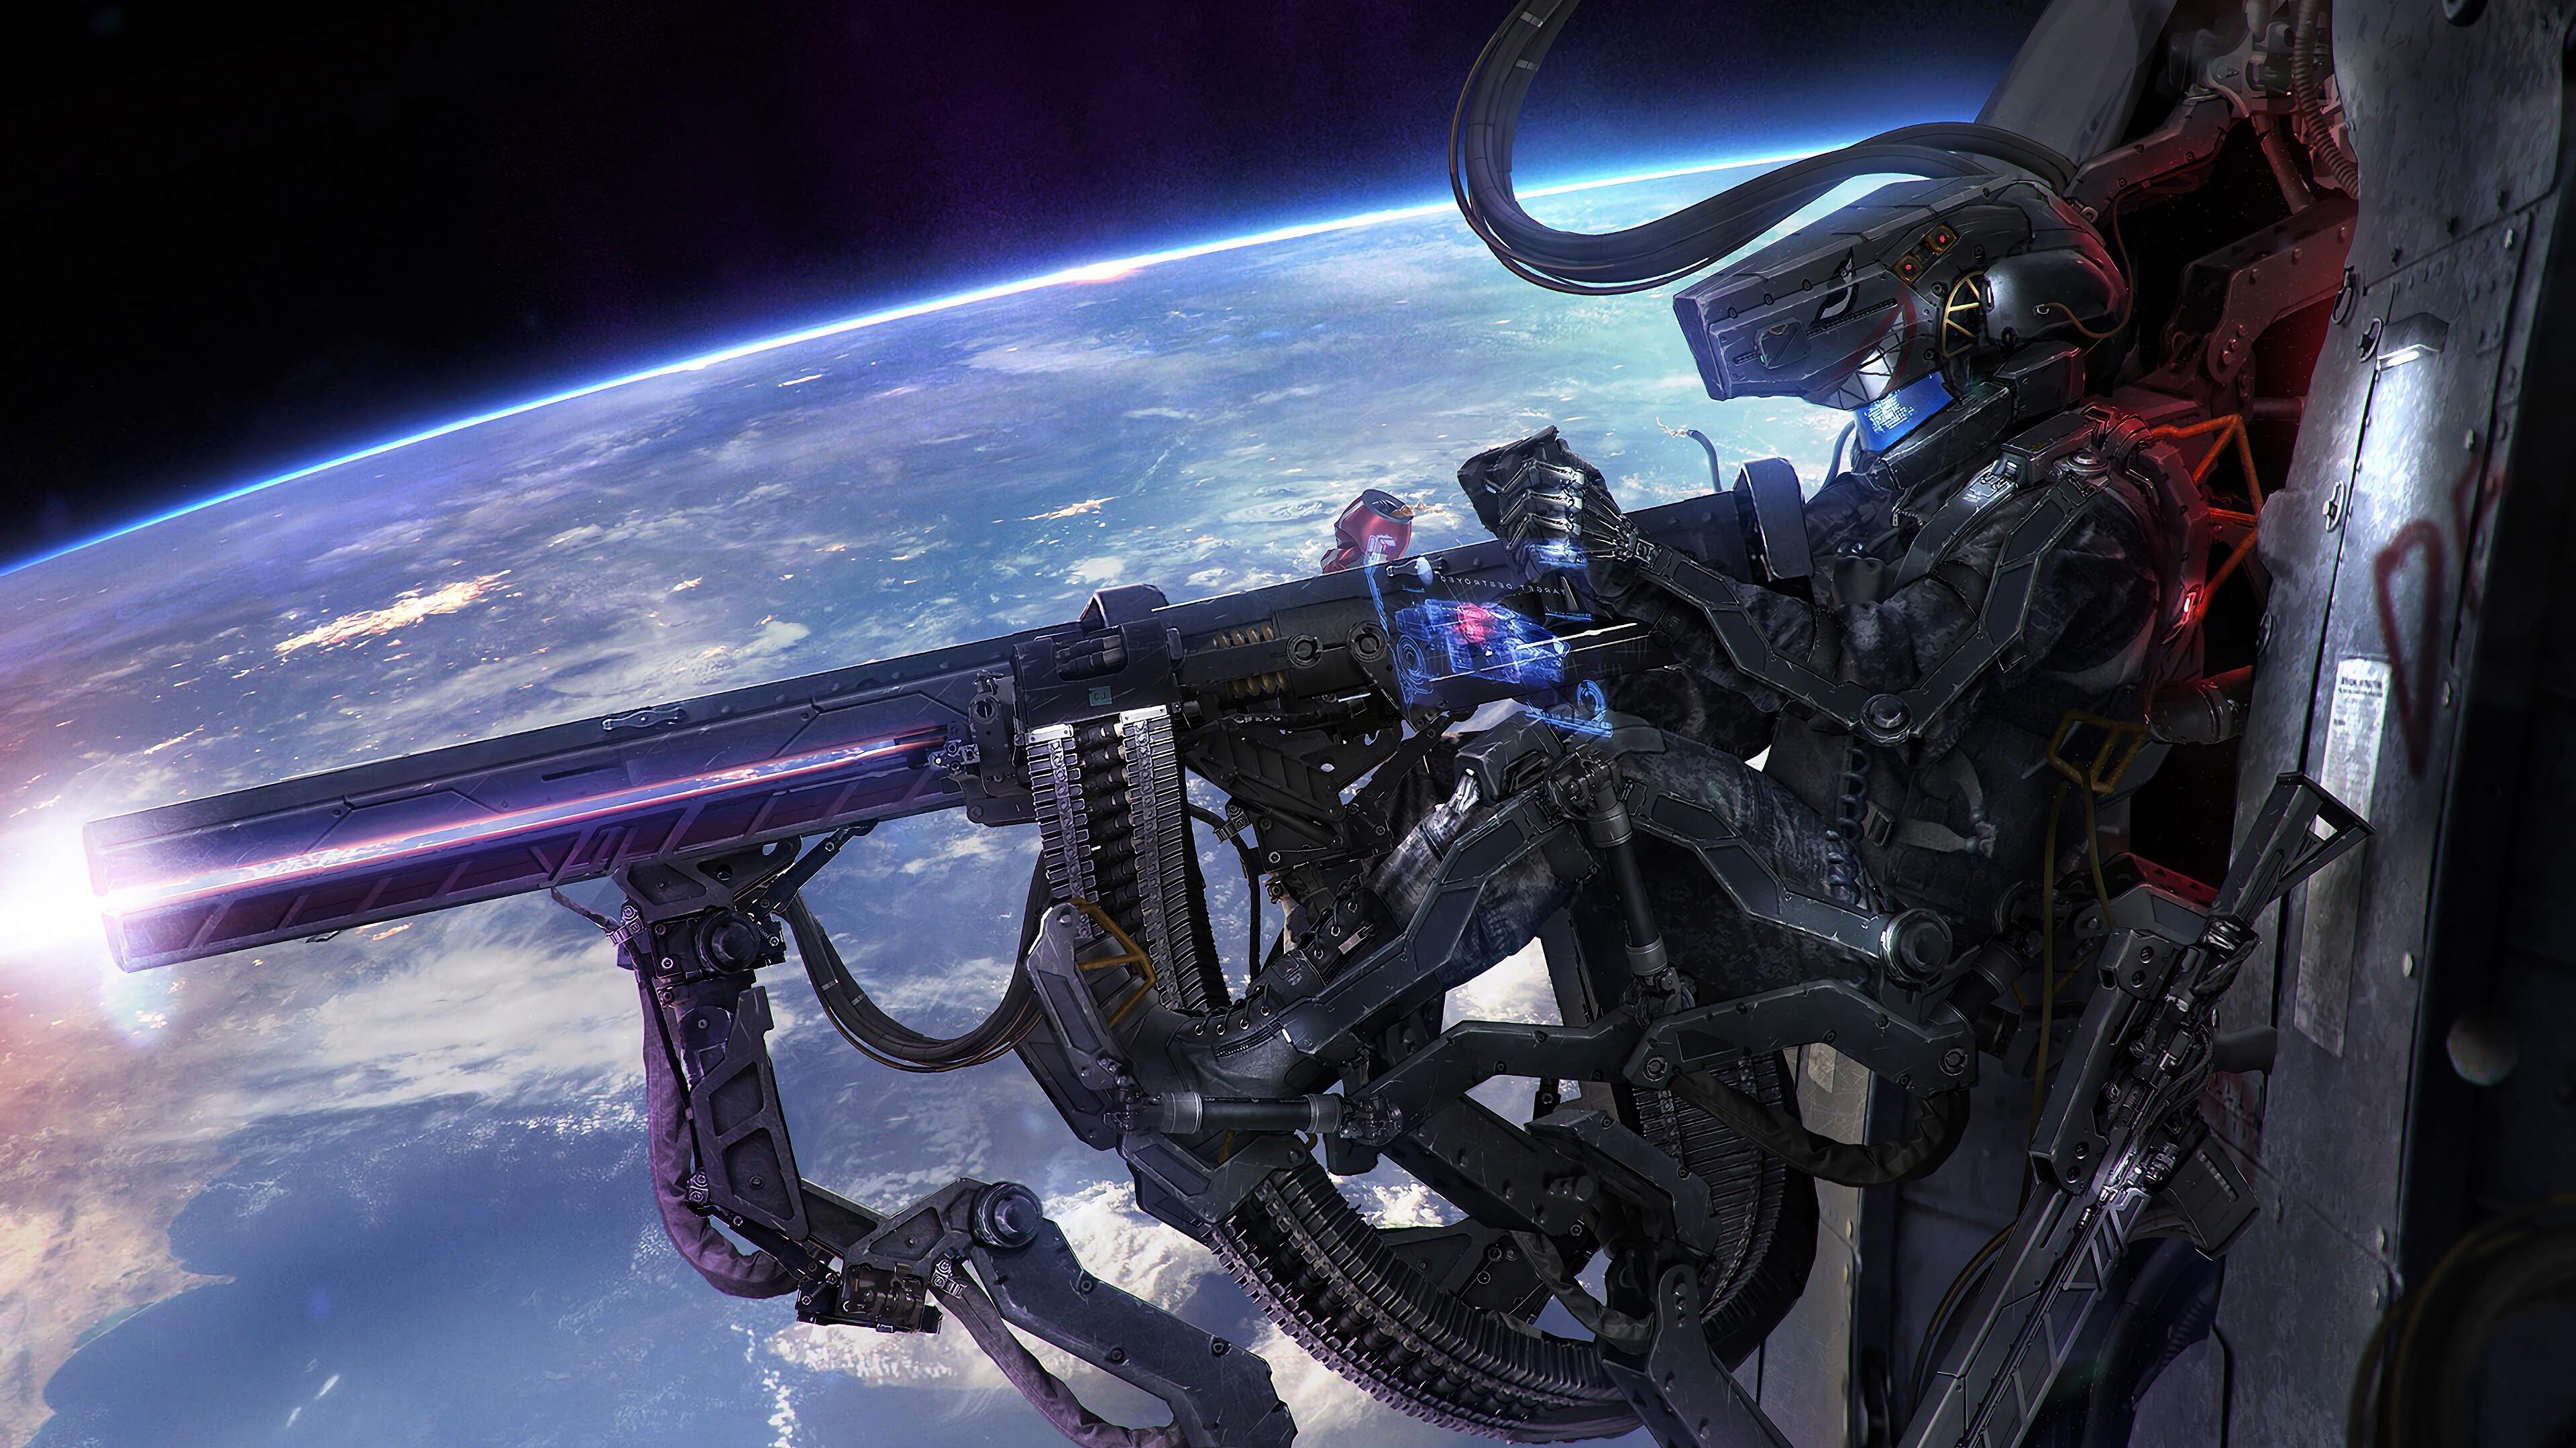 Sci Fi Soldier Weapon Outer Space 4k Wallpaper